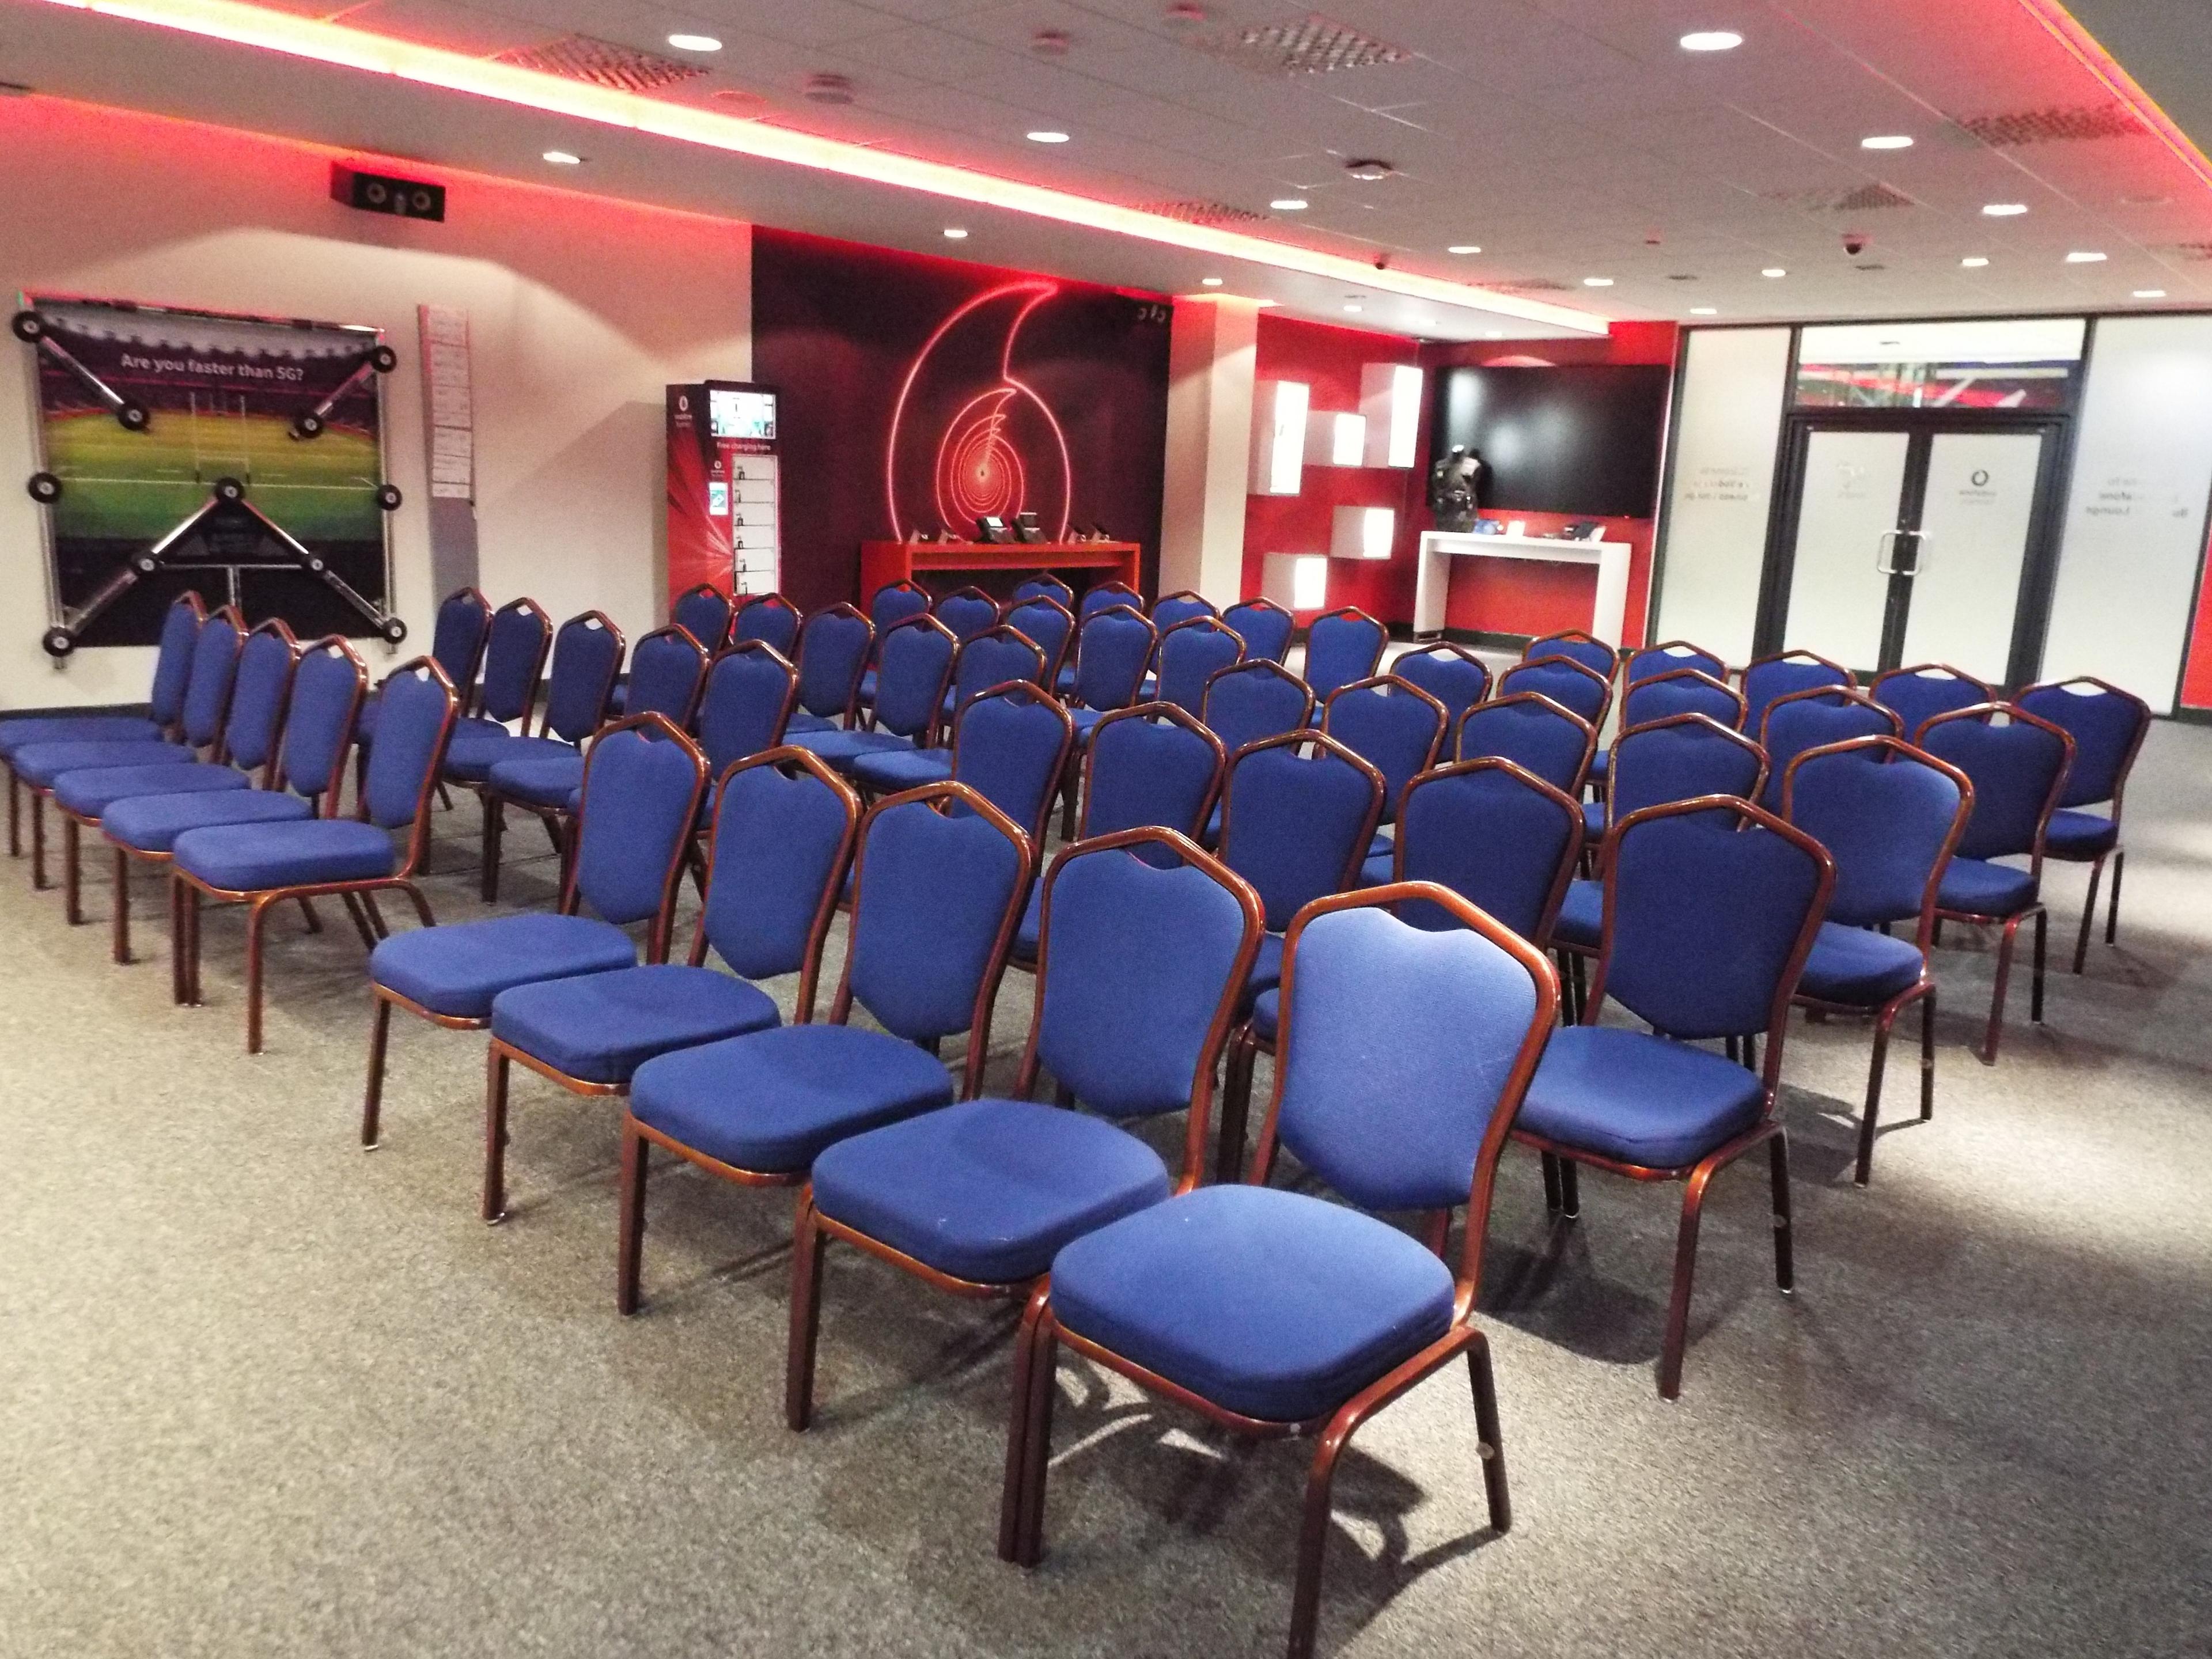 Vodafone Lounge, Coventry Building Society Arena photo #1